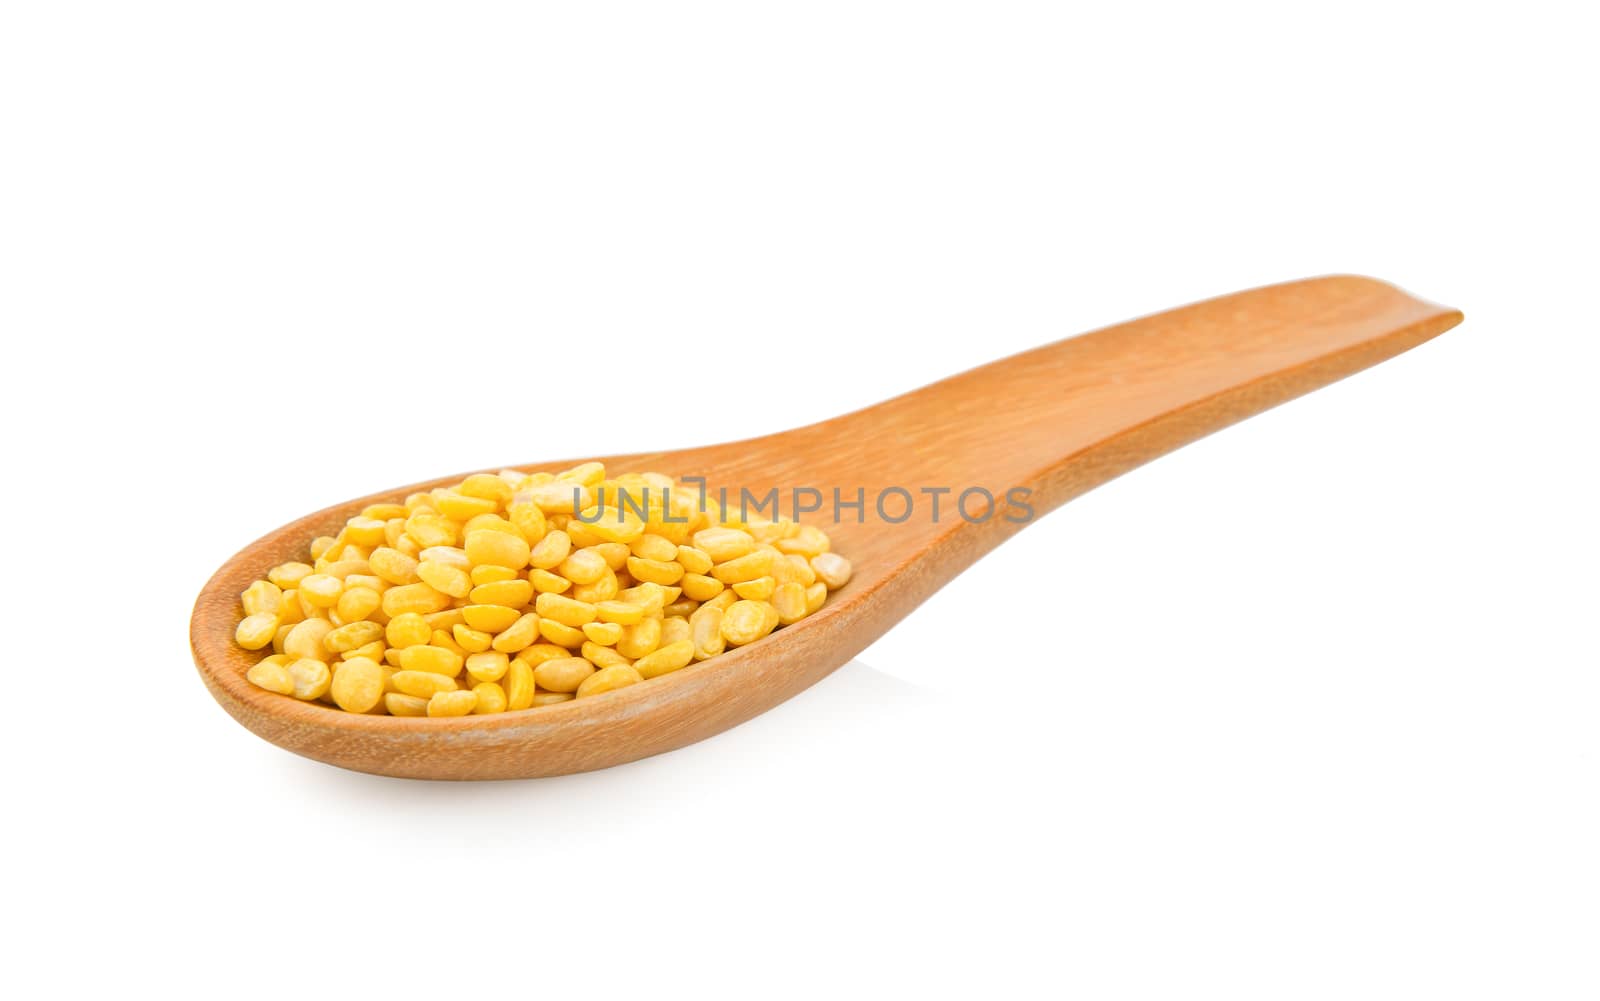 Green beans seeds in wood spoon on white background by sommai